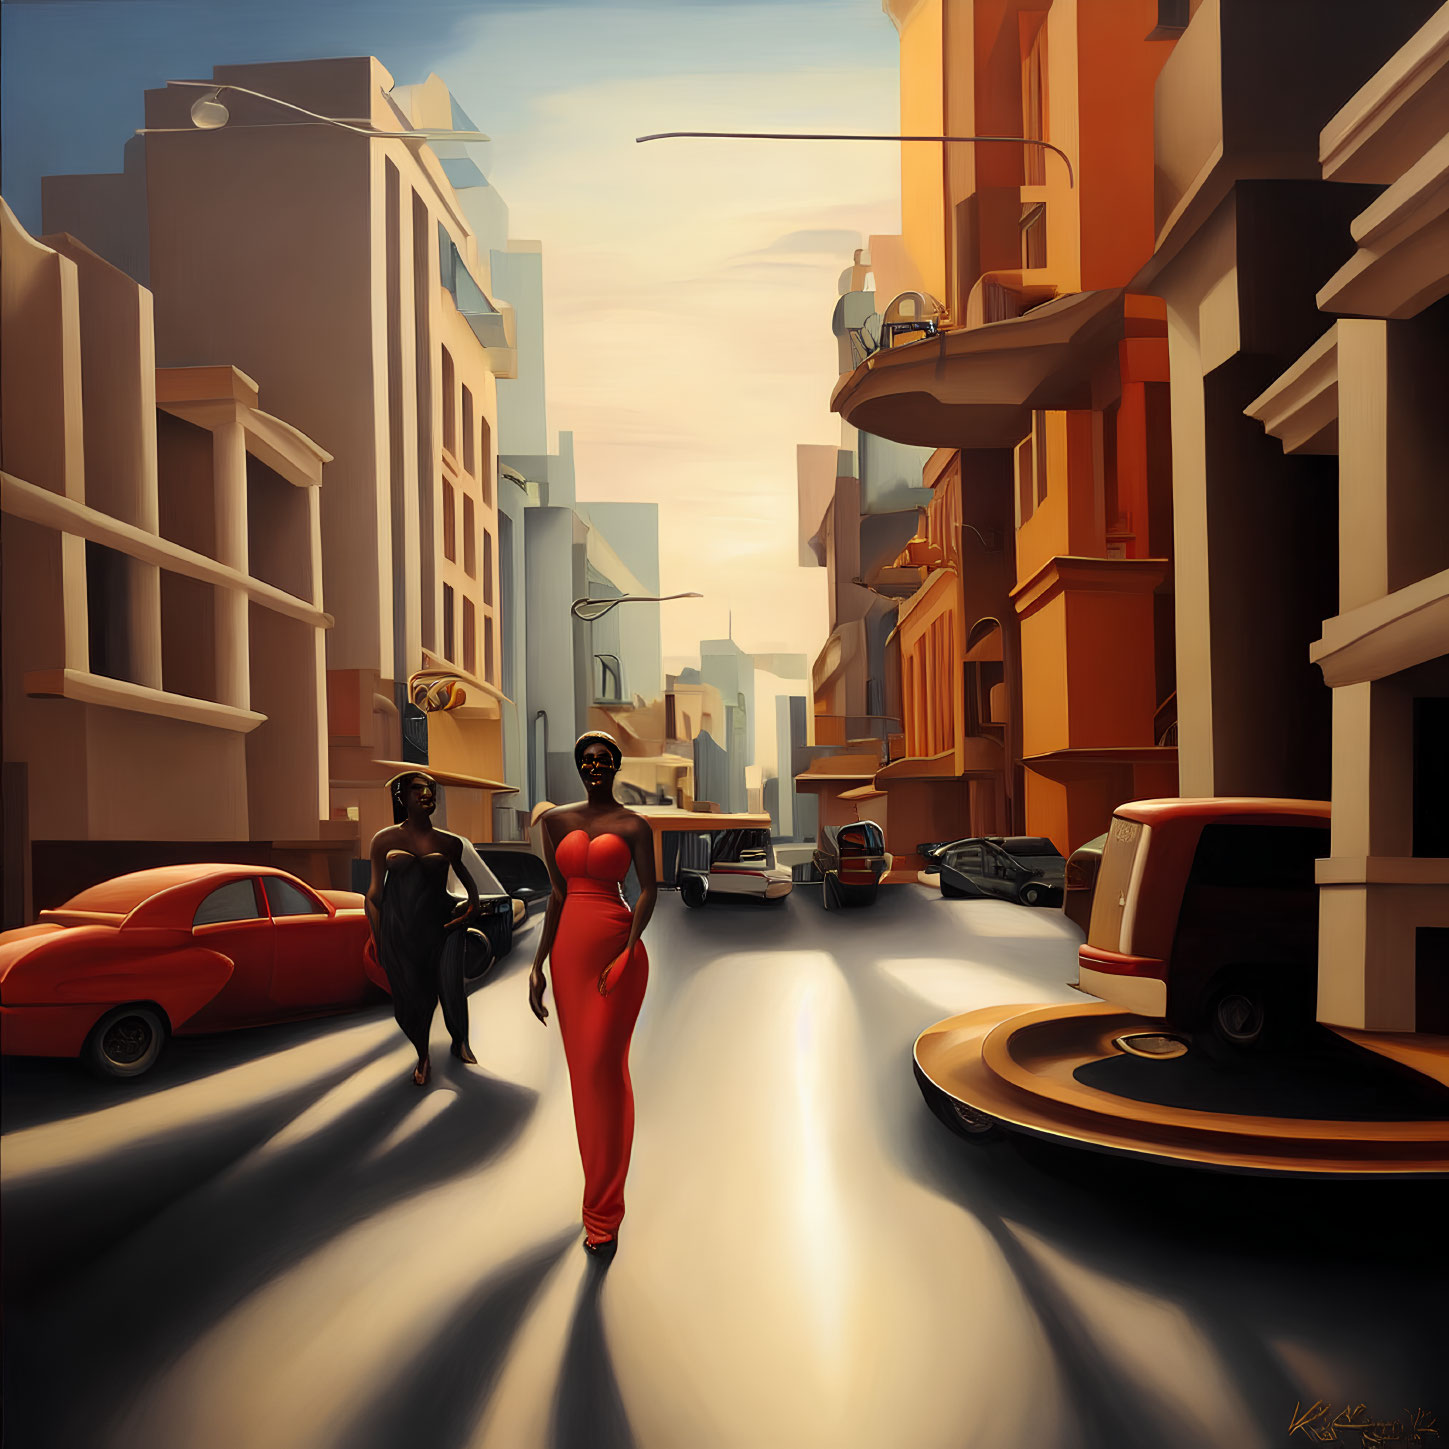 Stylized painting of two women in urban setting